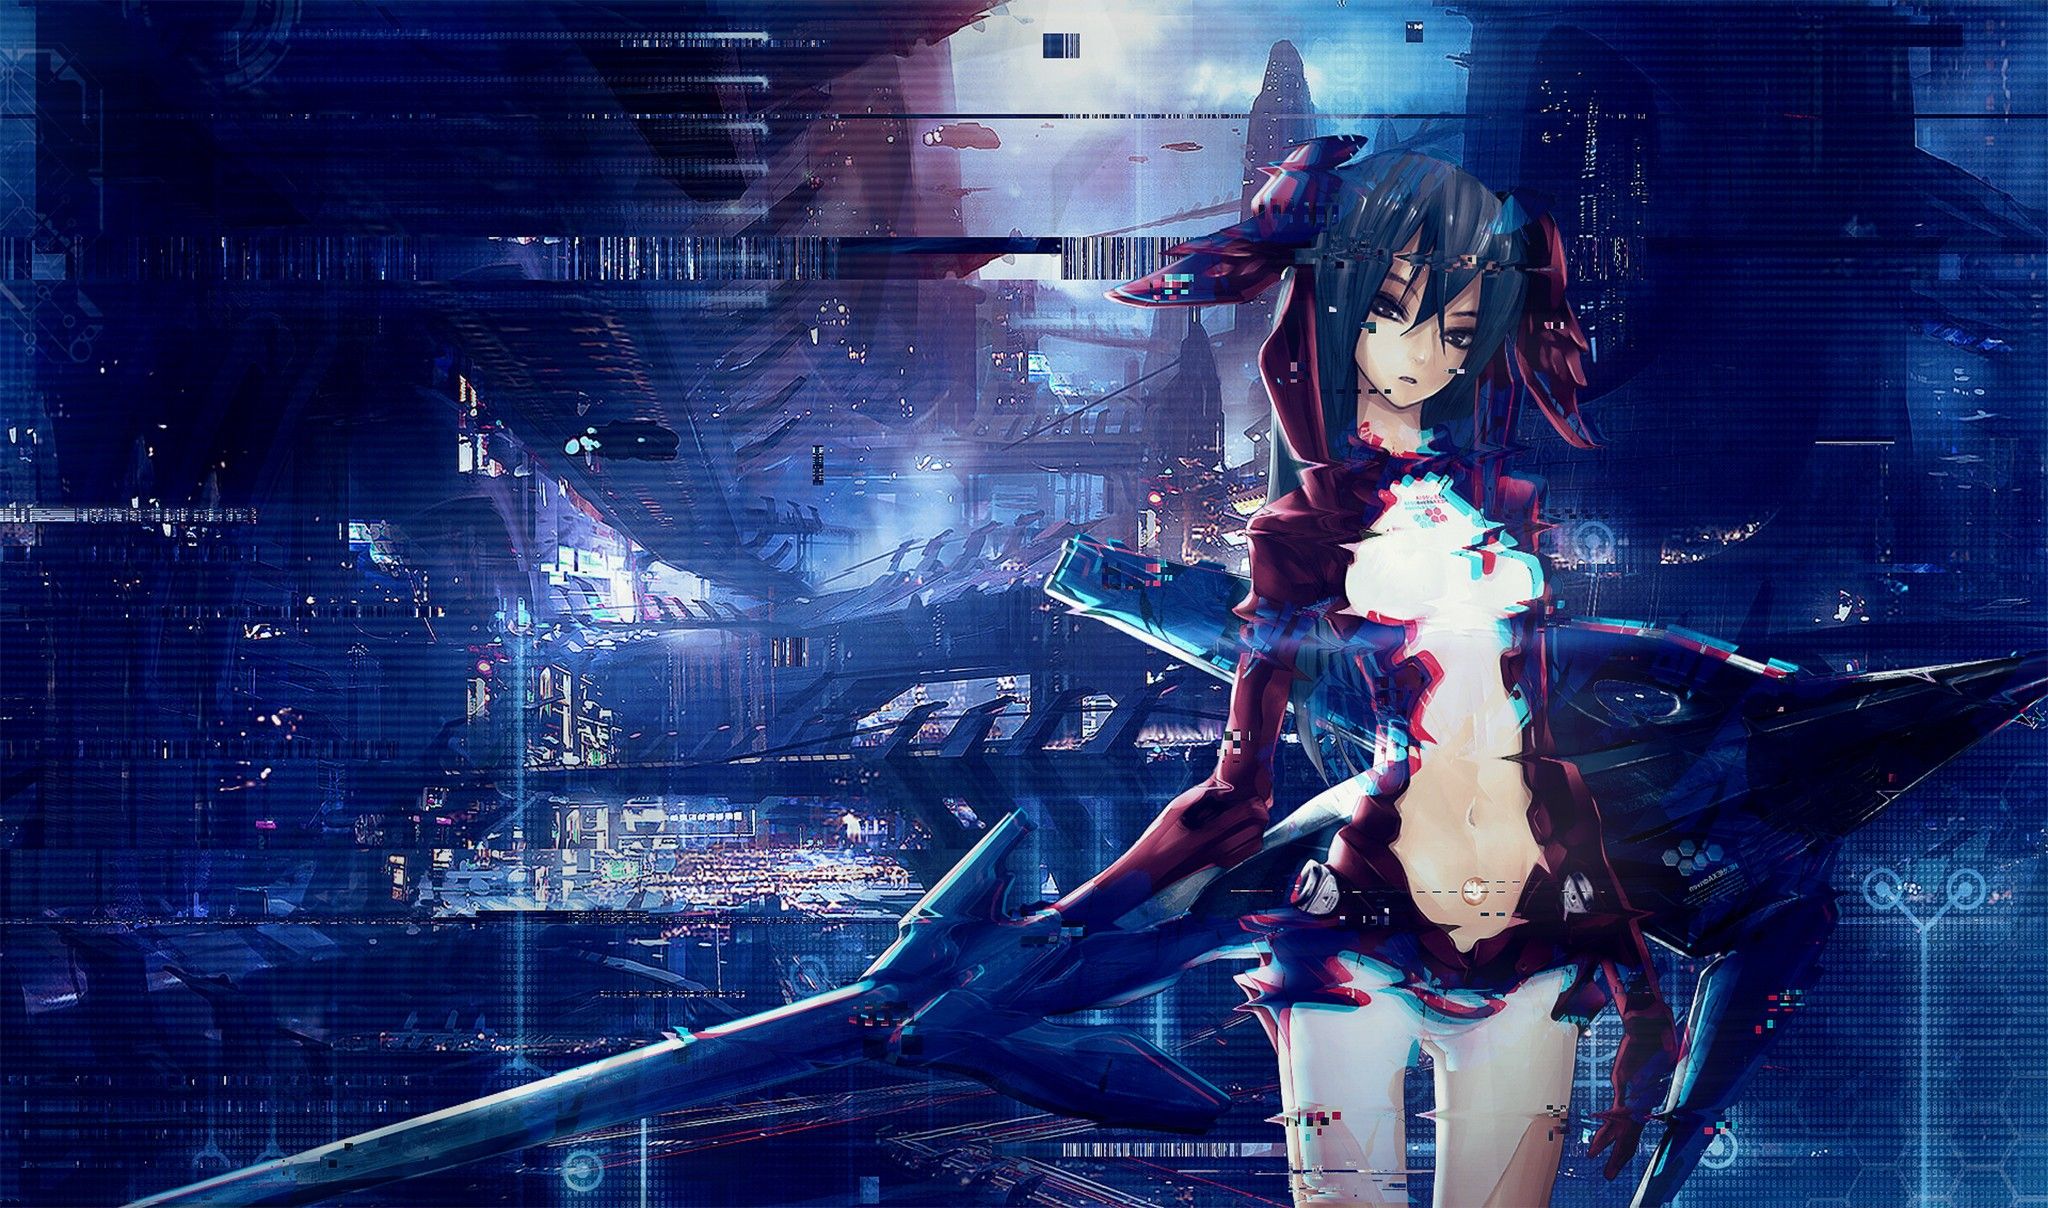 Anime Girl Glitch Art Wallpapers - Unique Wallpapers ideas iPhone